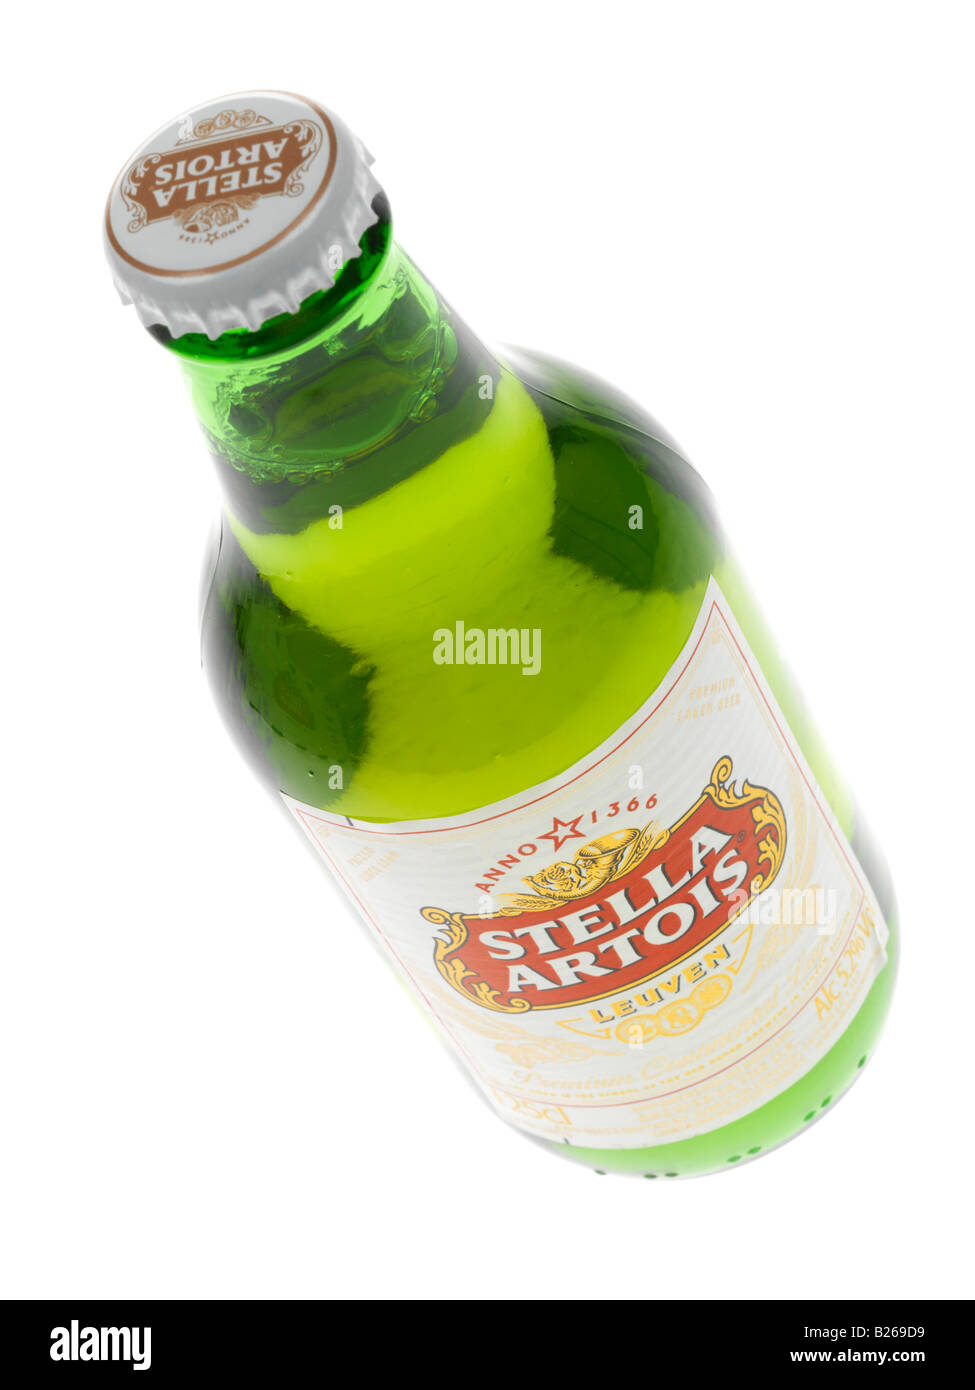 Bottles Of Unopened Stella Artois Lager Beer Isolated Against A White Background With A Clipping Path And No People Stock Photo